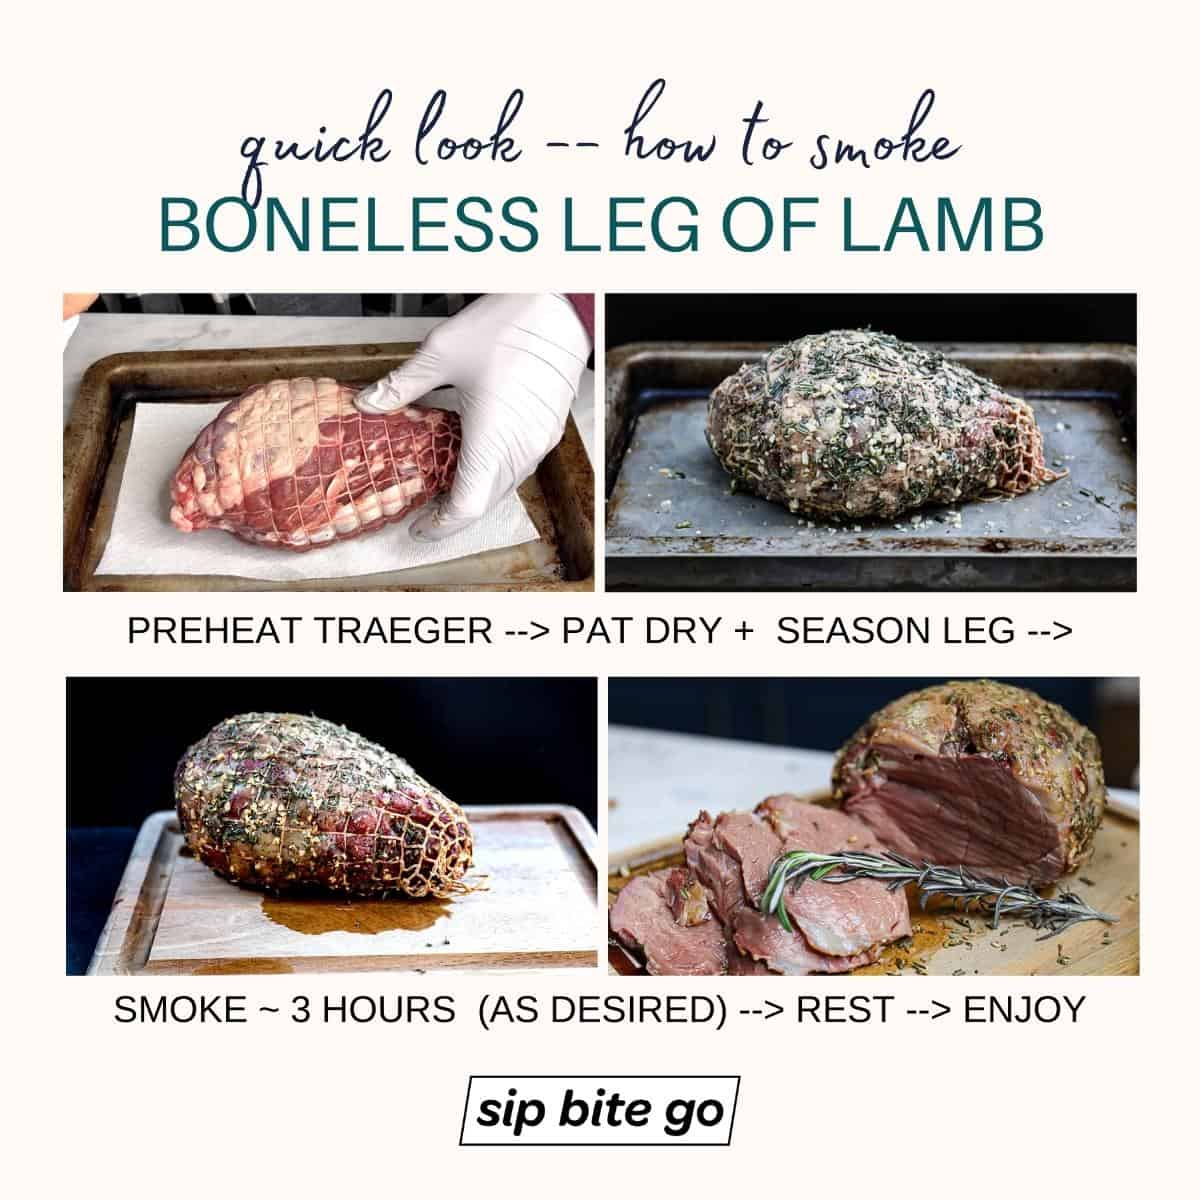 infographic with steps to make smoked boneless leg of lamb on pellet grill